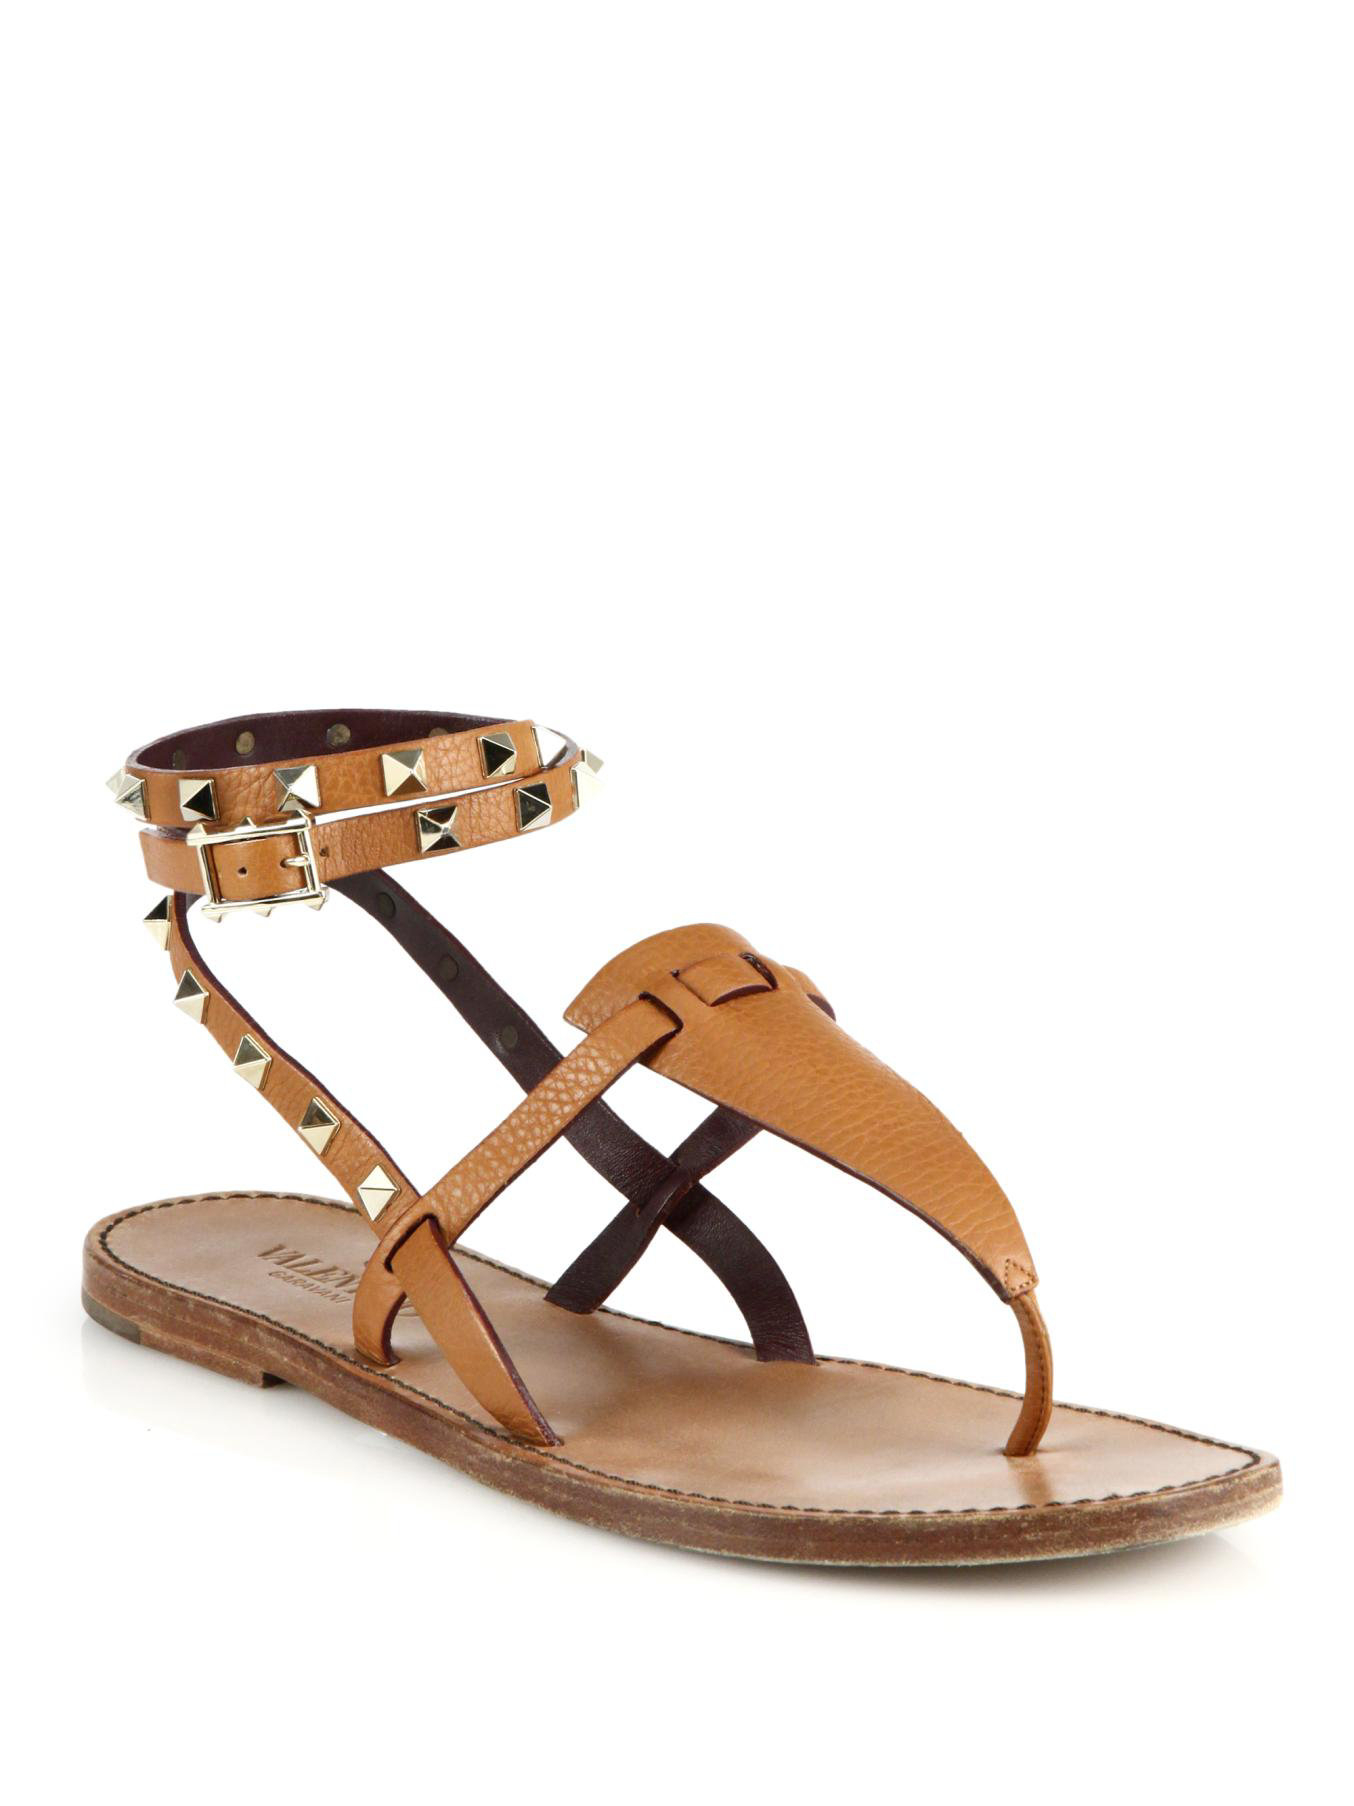 Lyst - Valentino Rockstud Wrap-around Strap Leather Thong Sandals in Brown